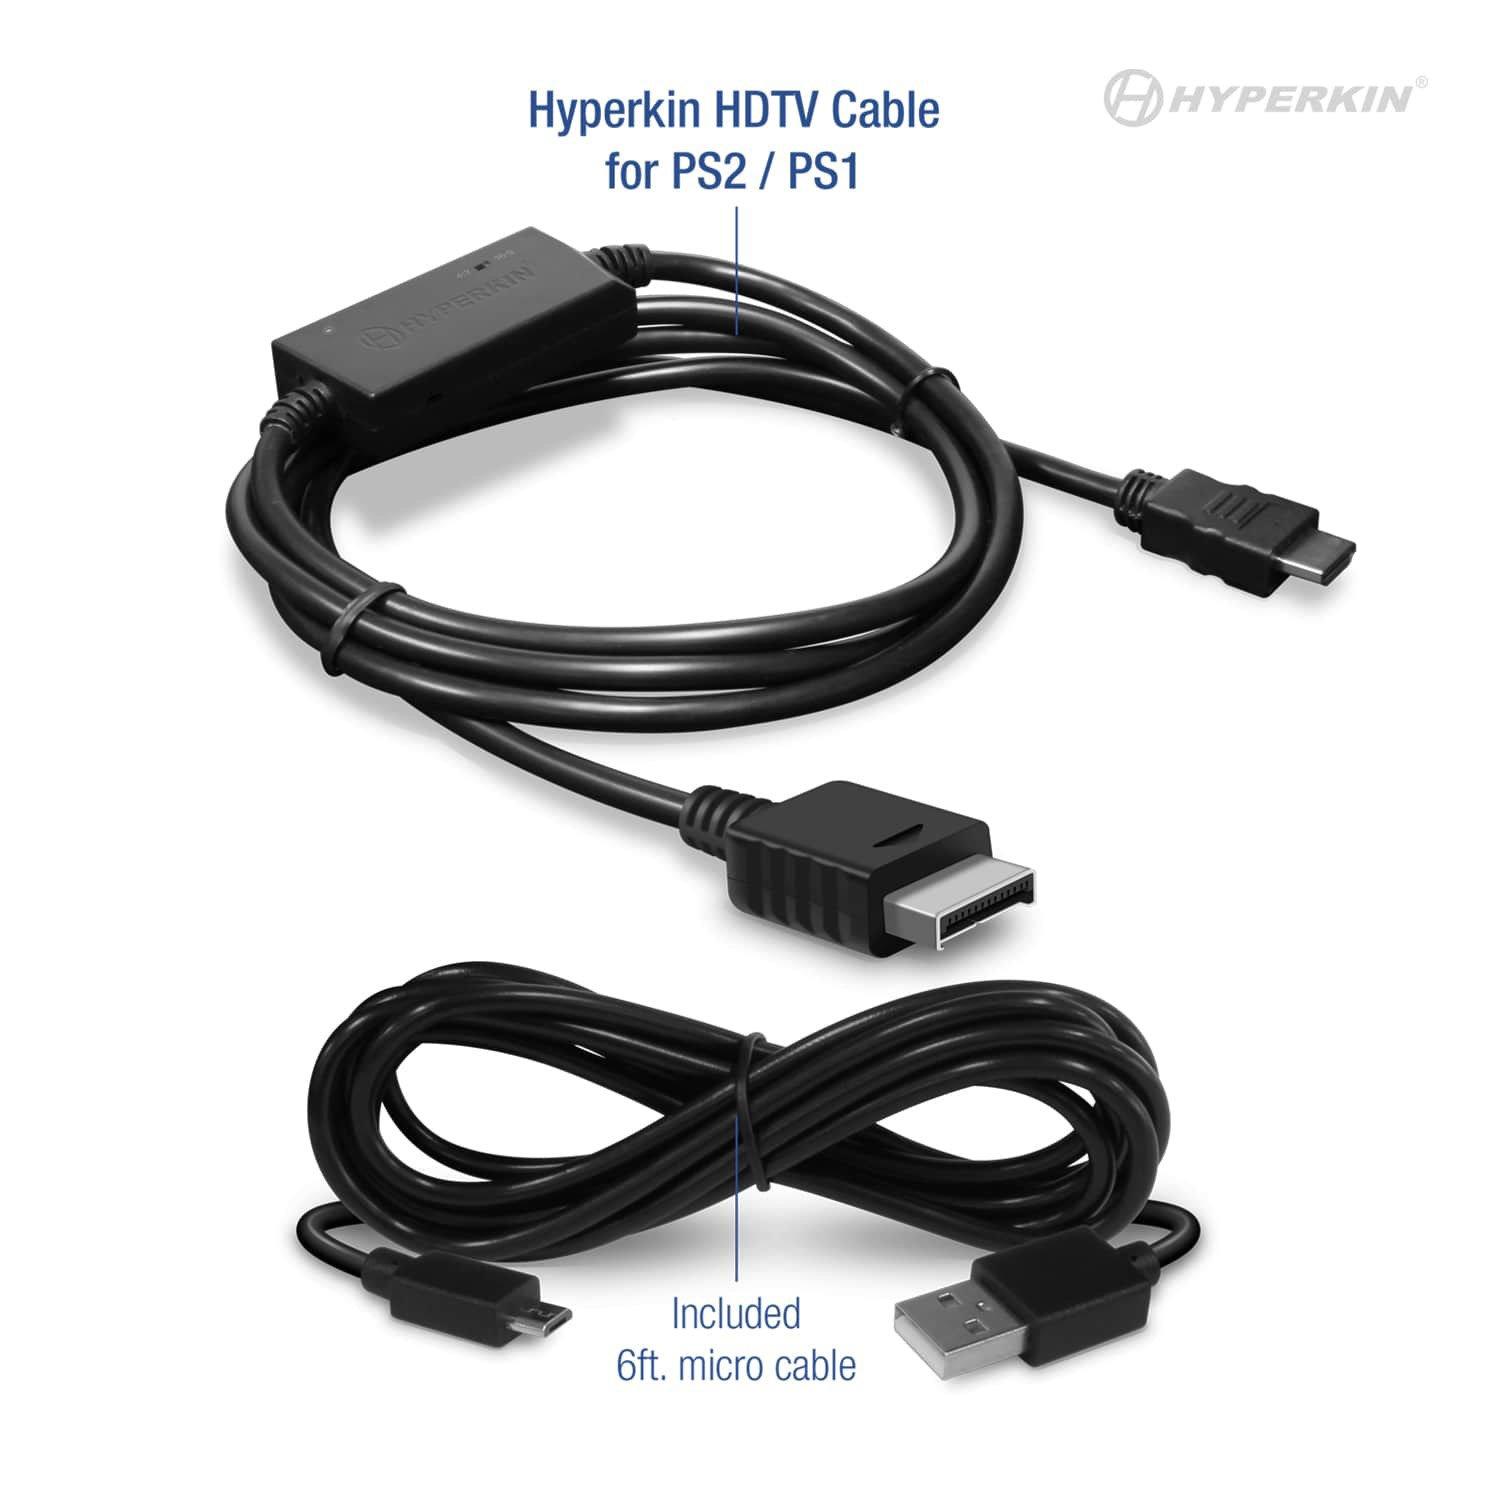 HDTV Cable for PlayStation 1 and 2